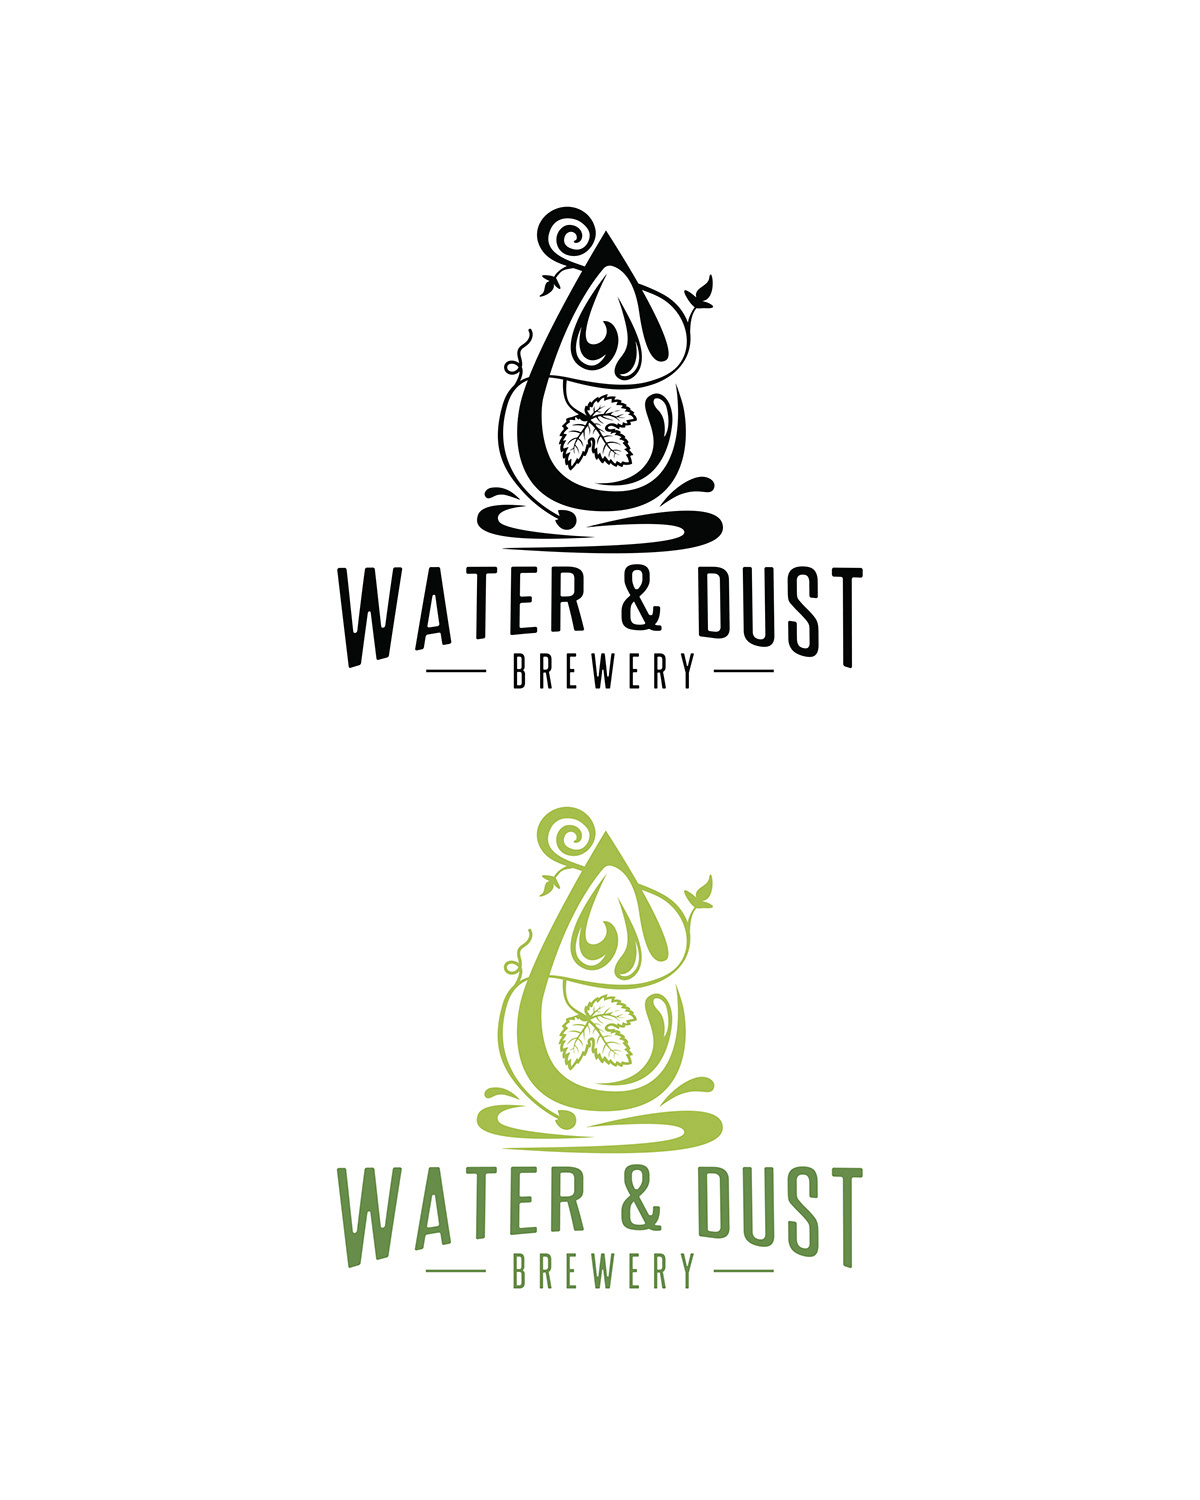 Professional logo design for Brewery in hanover PA. Creative beer logo 